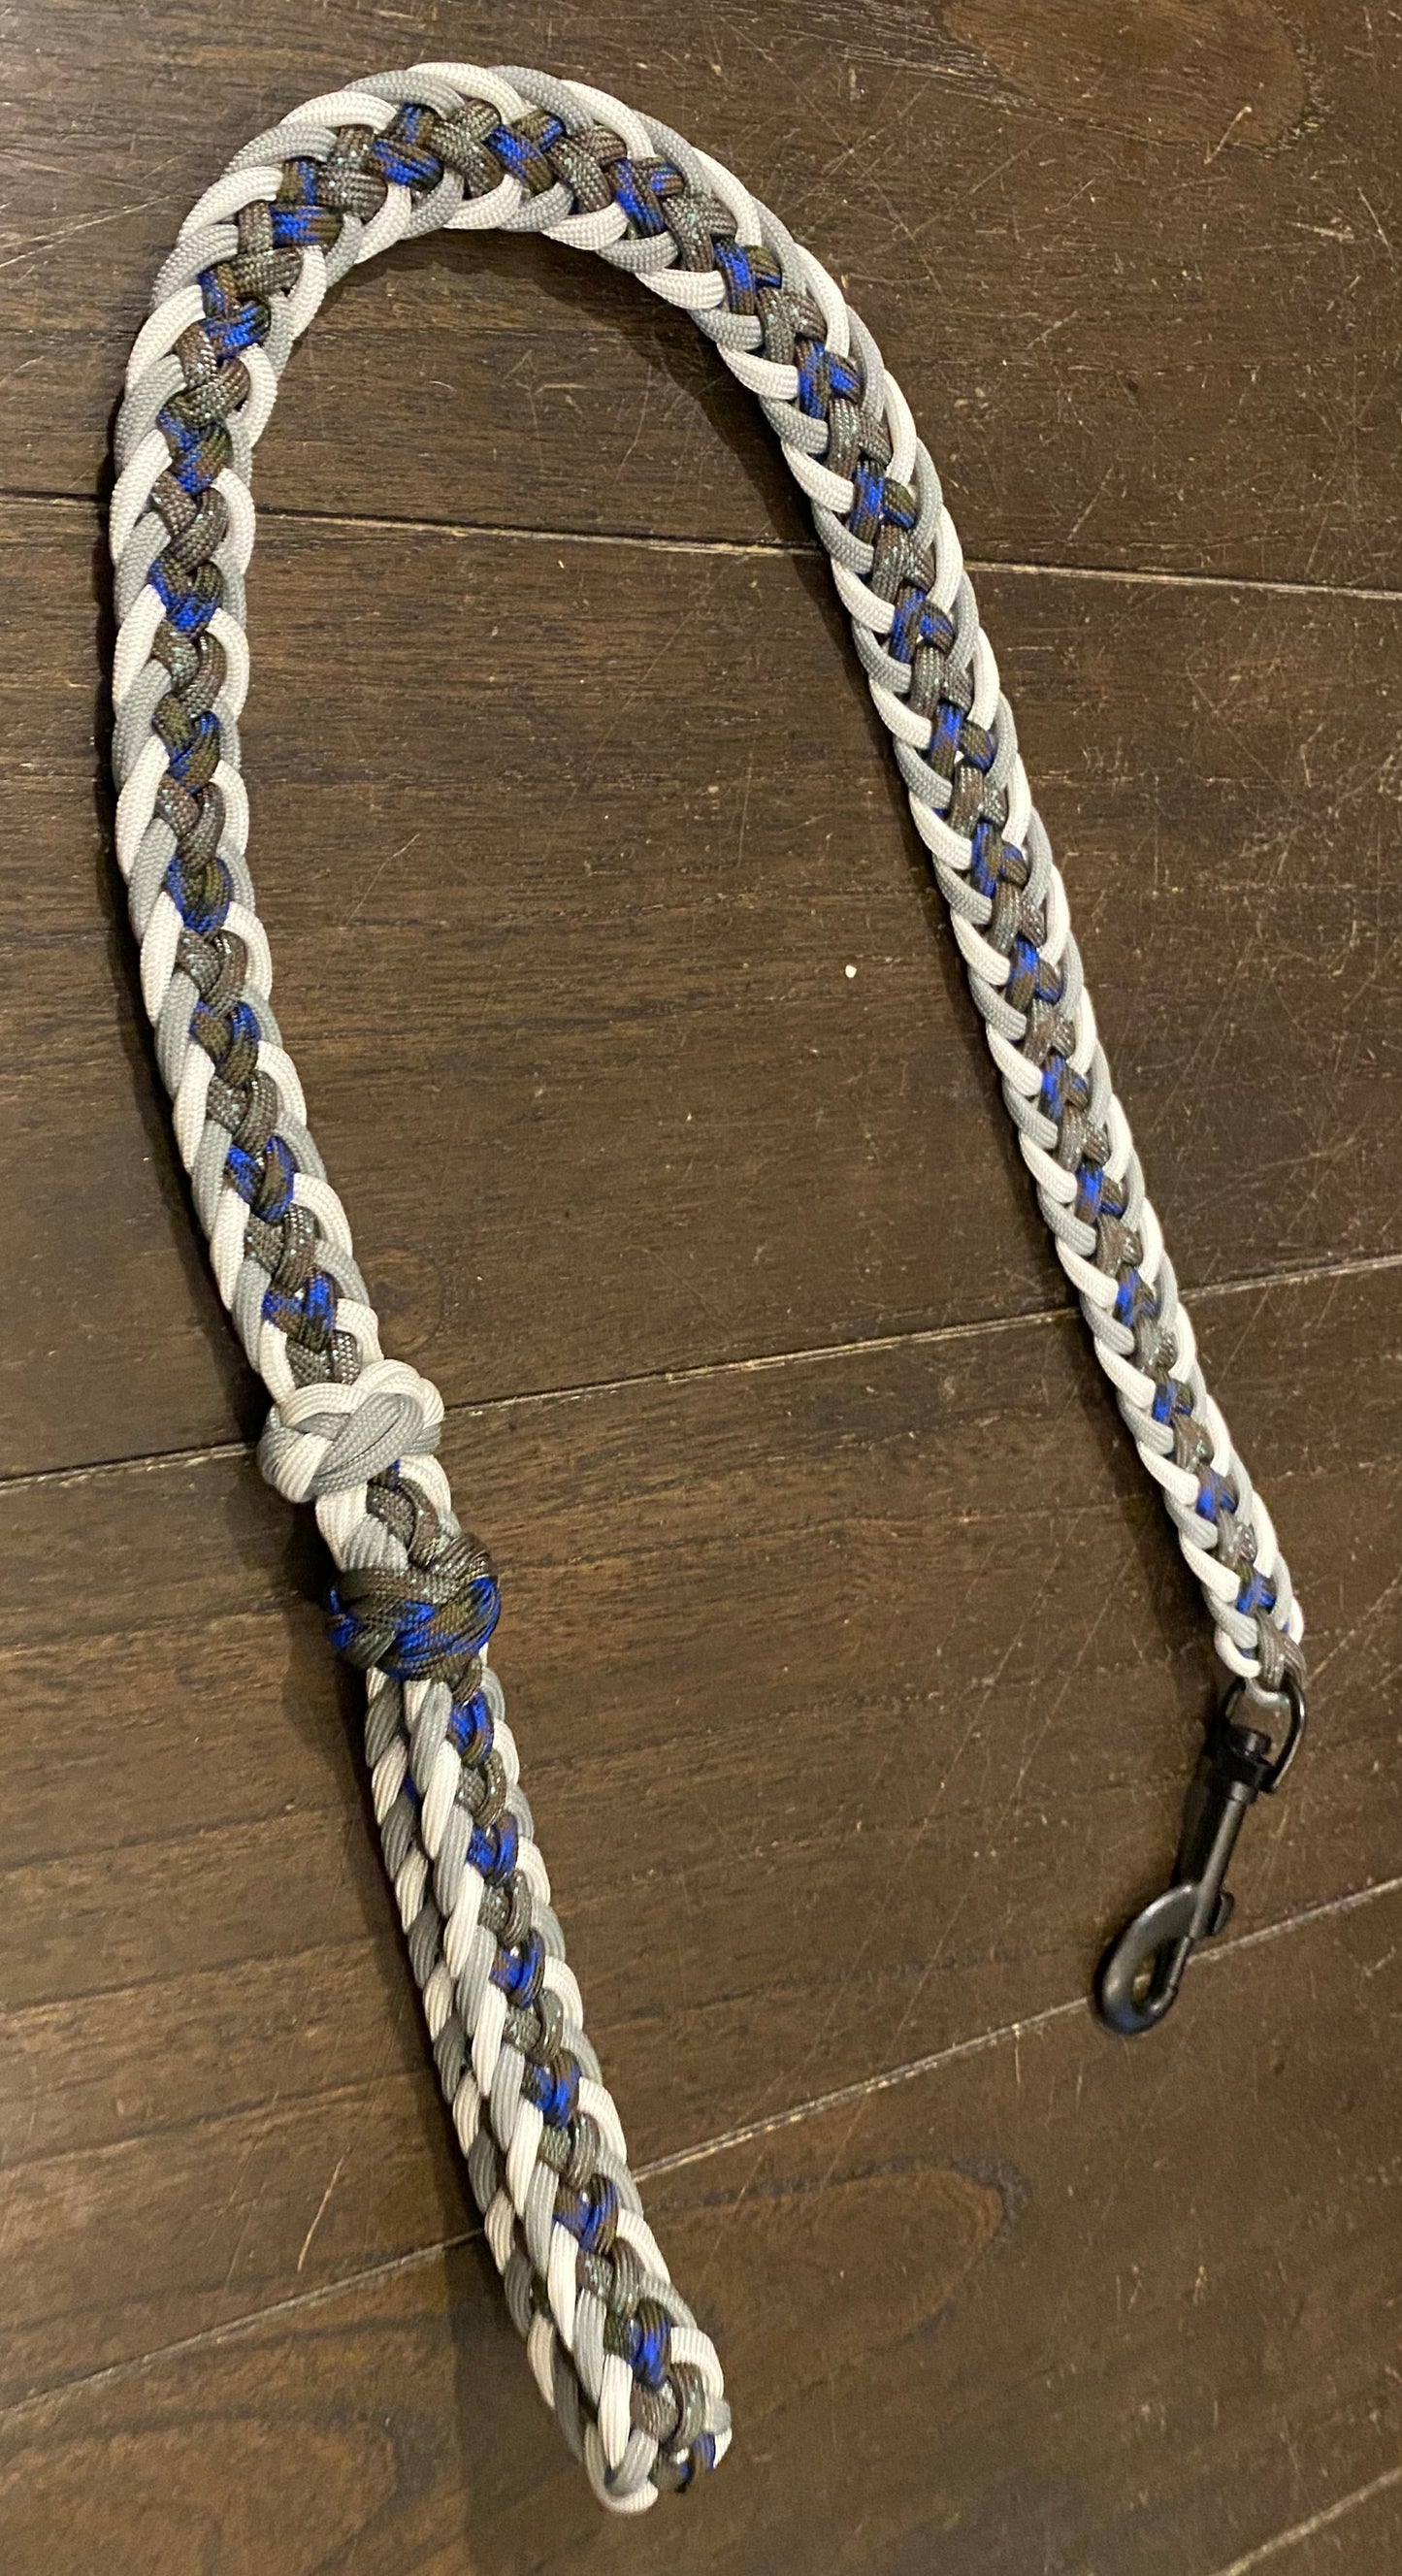 Premade Paracord Kara Yatsu Leash, Gray, White, Canis, and Cove, 30.25 inches long